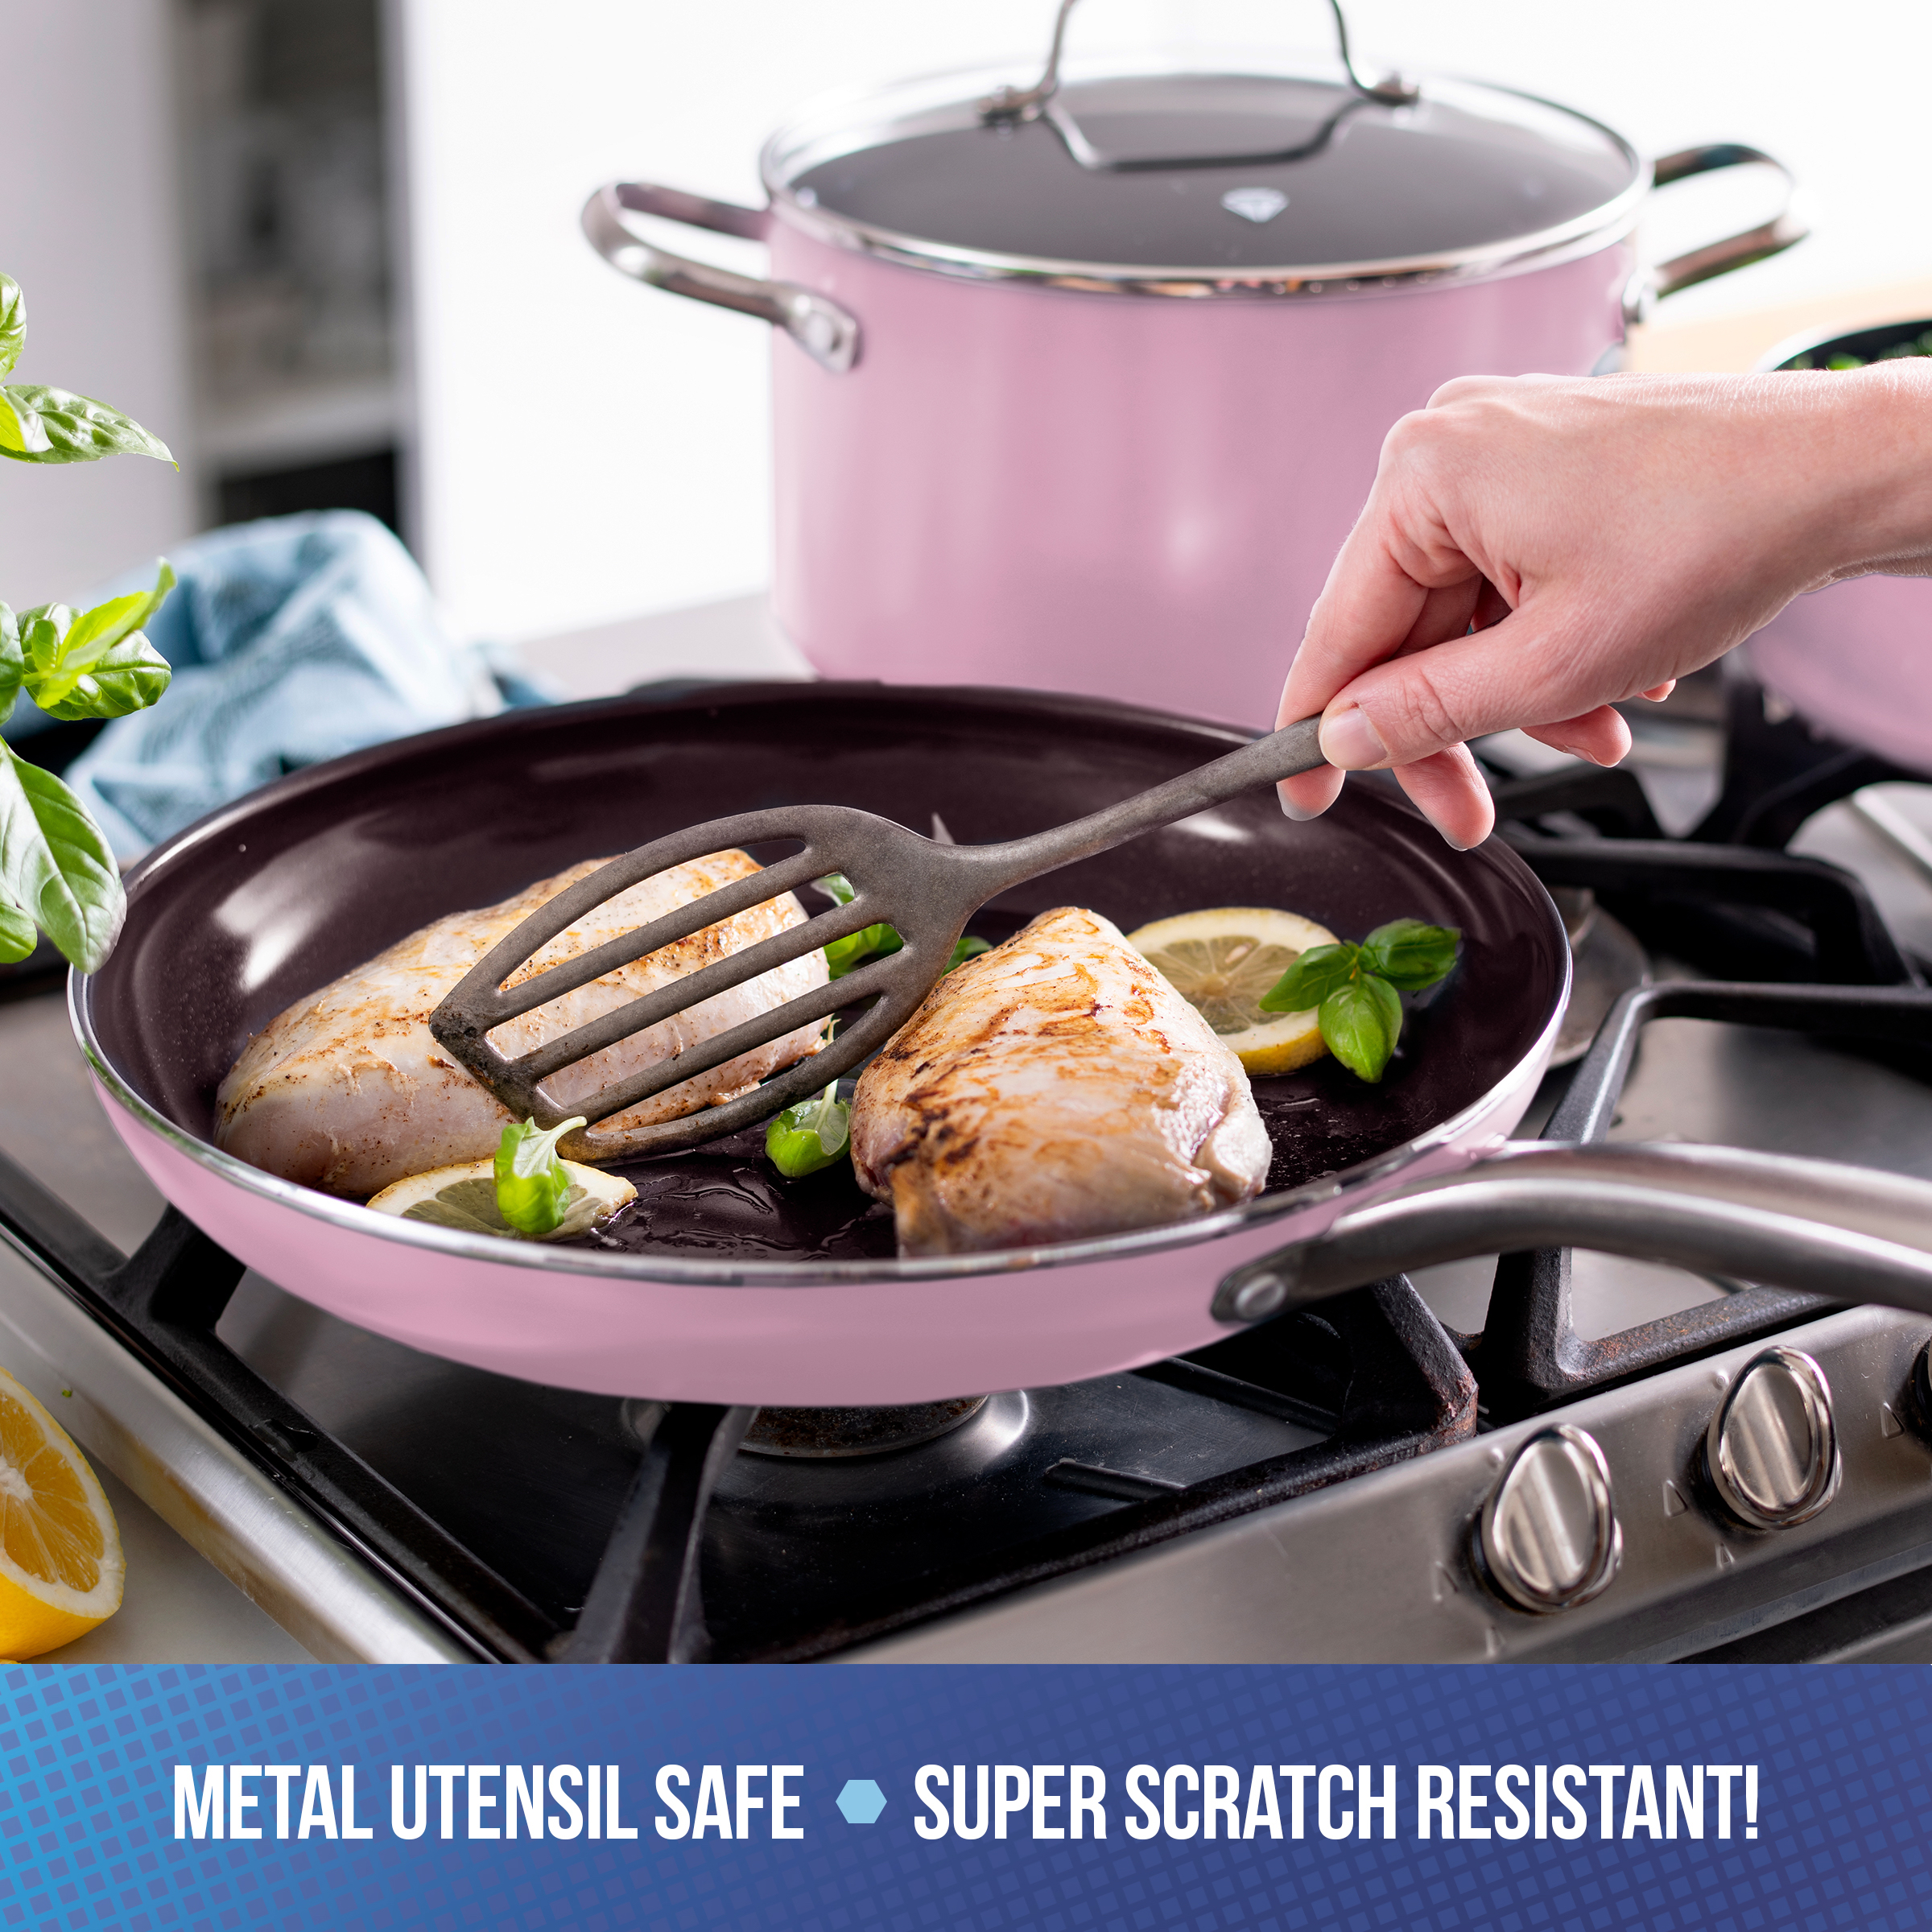 Blue Diamond, Pink Limited Edition Nonstick Ceramic 11-Piece Cookware Set - image 4 of 8